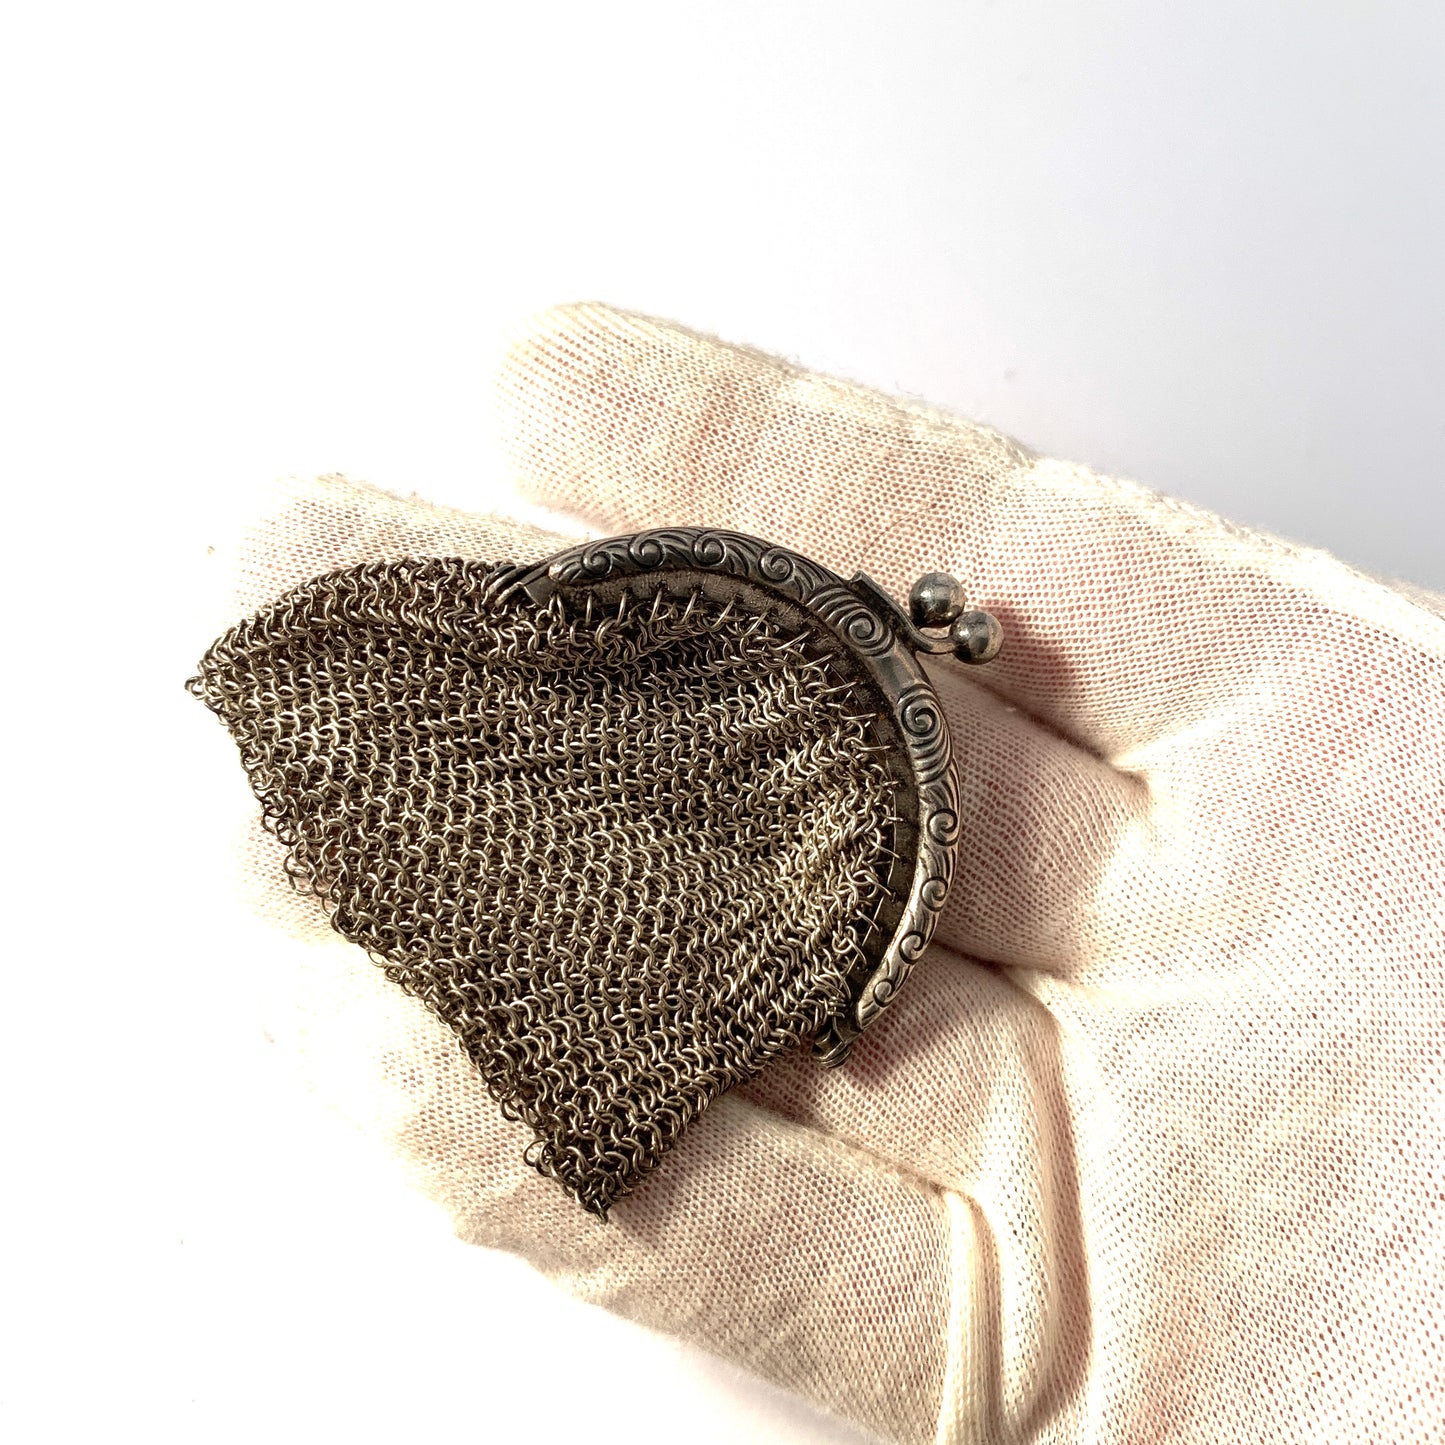 Antique Early 1900s Solid Silver Purse Pendant.